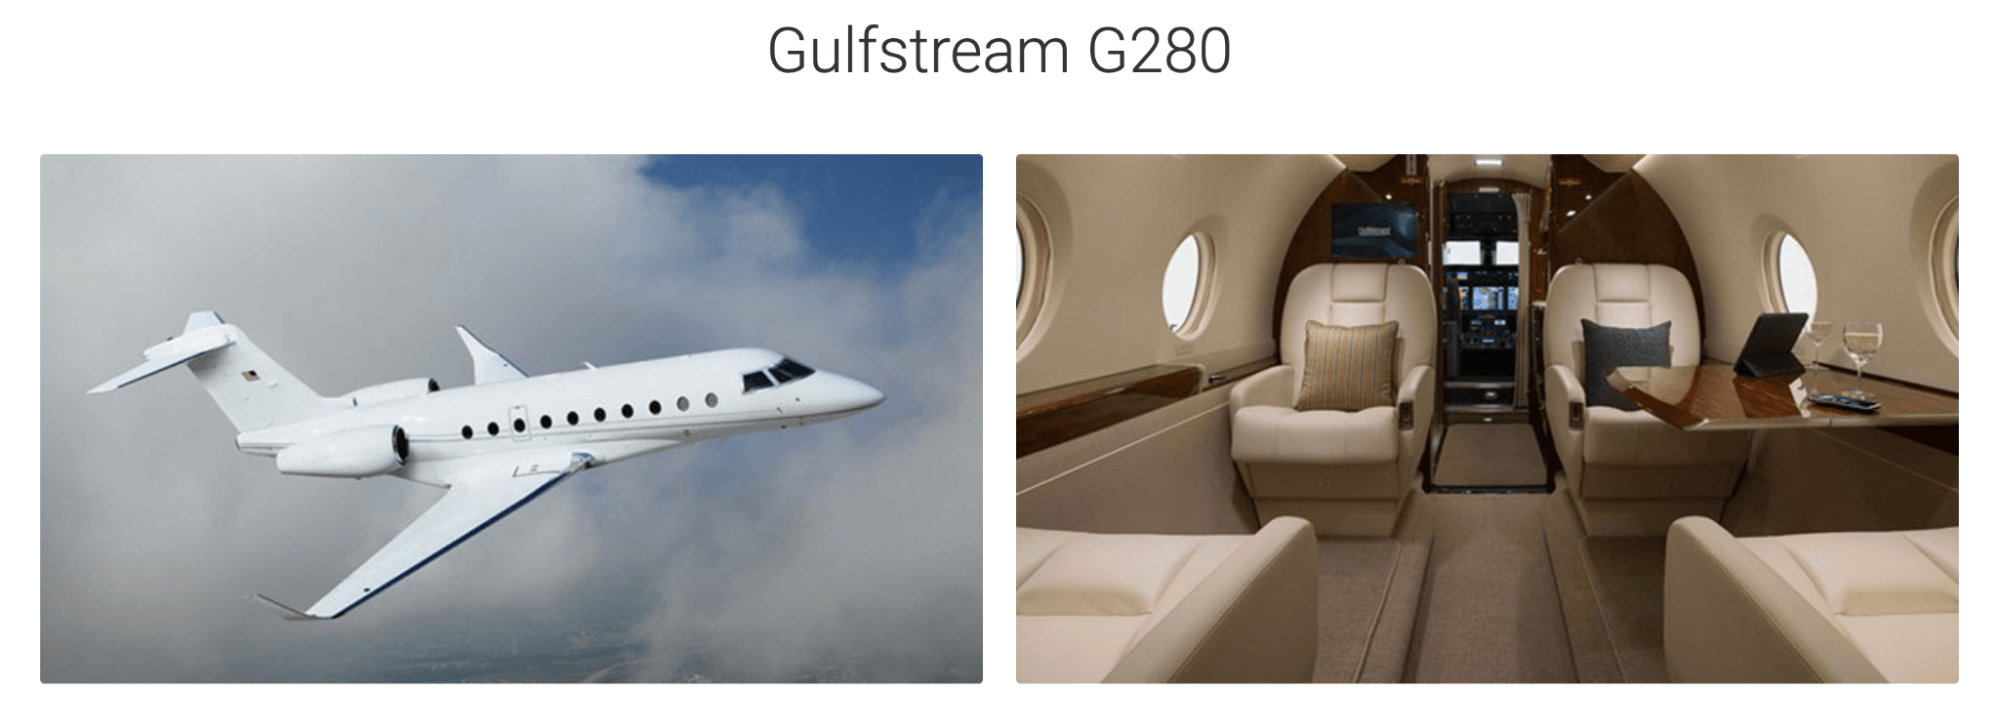 The picture shows the interior and exterior of Gulfstream G280 jets available from JetOptions.